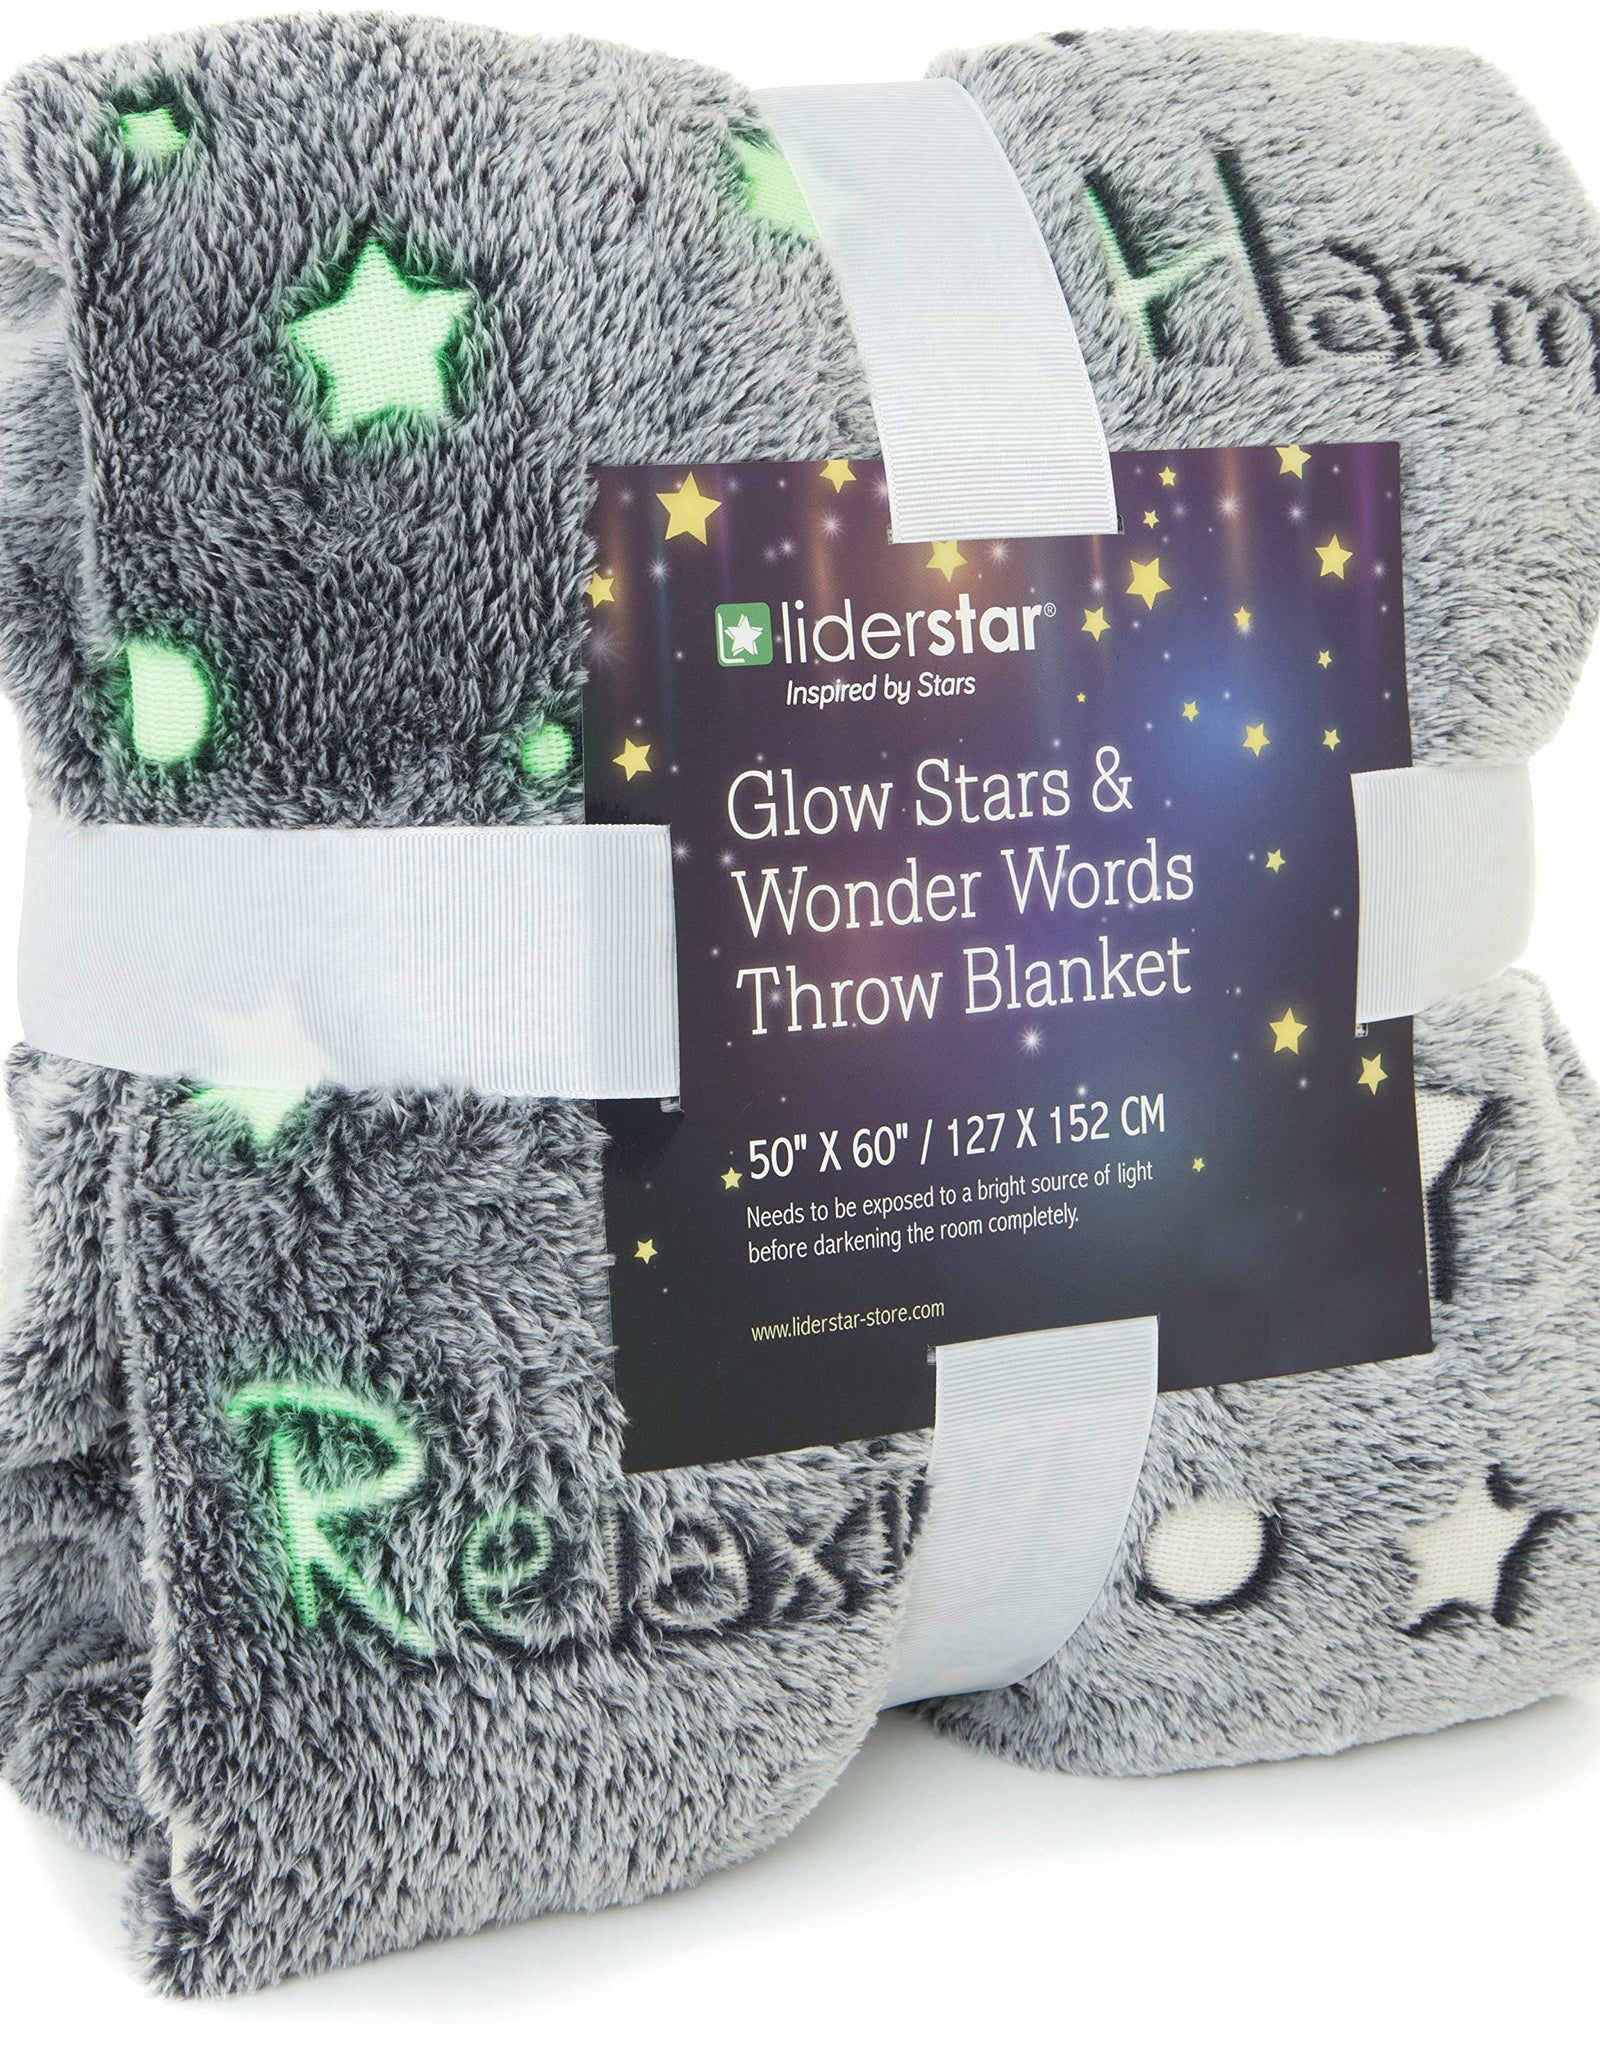 liderstar Glow in The Dark Throw Blanket,Super Soft Fuzzy Fluffy Plush Fleece,Decorated with Stars and Words of Healing, Christmas, Birthday Gift for Girls Boys Kids Teens Toddler, Gray,50"x 60"